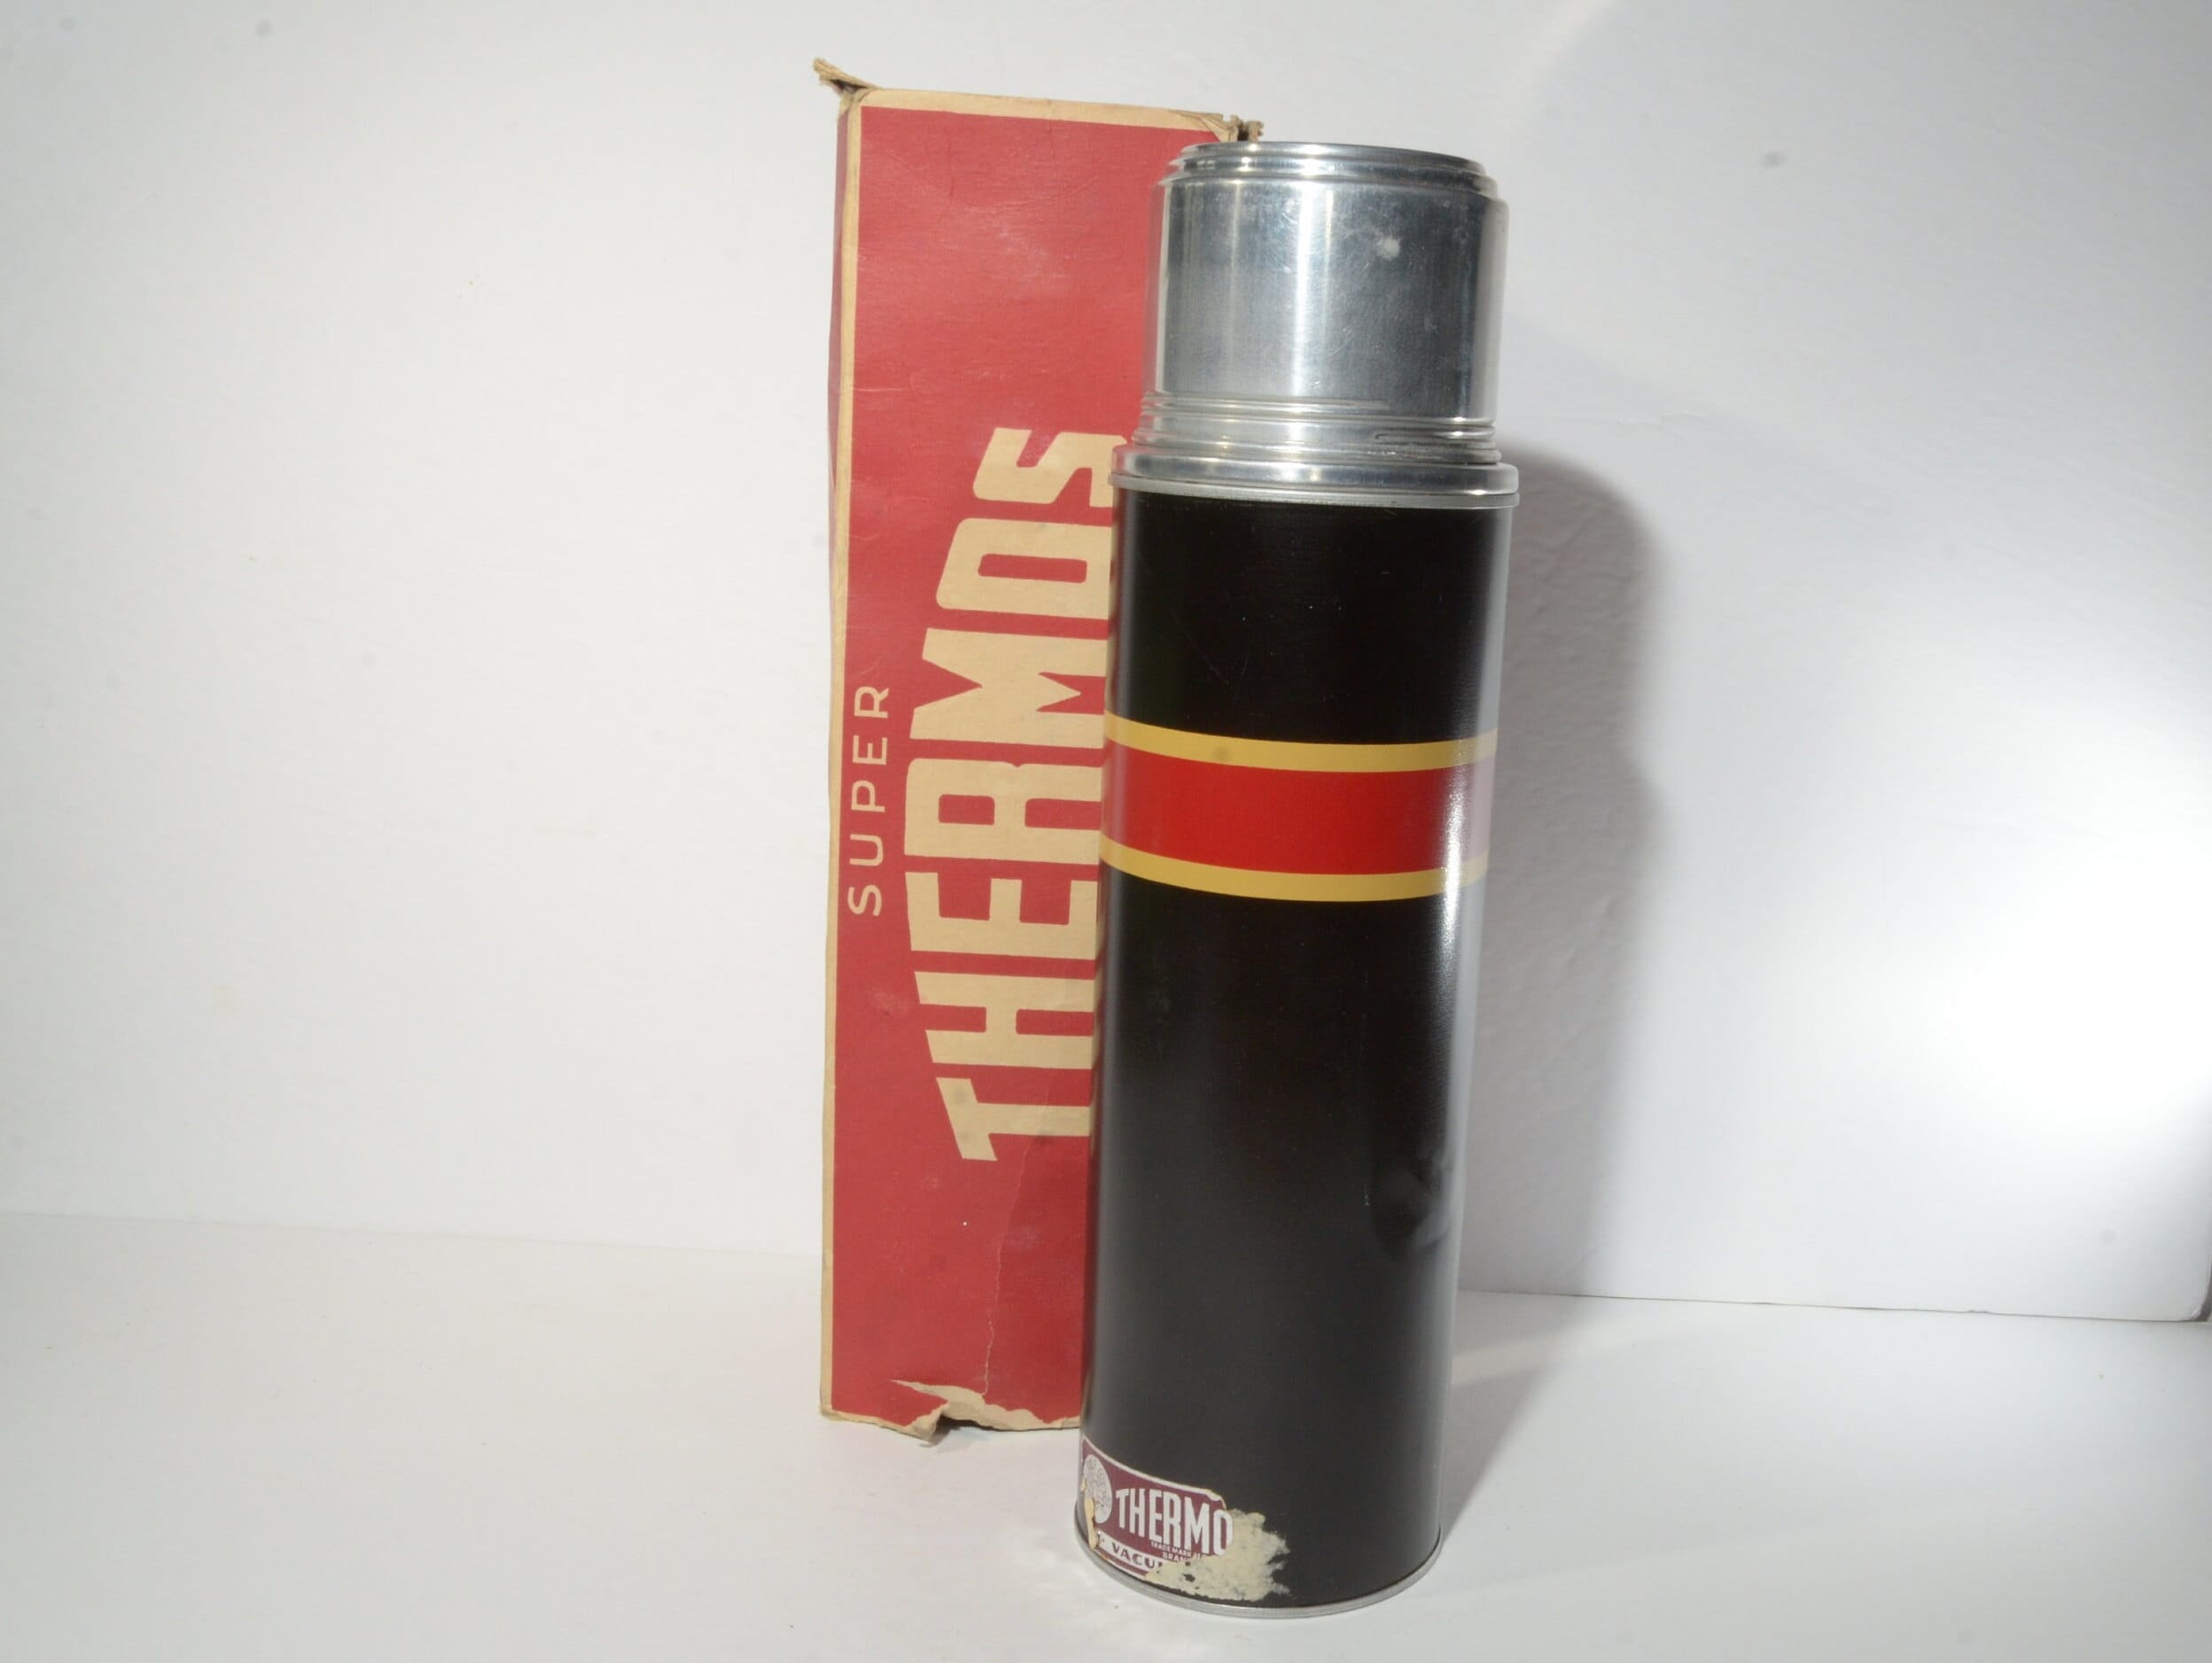 Vintage Thermos/ Red/ Thermos/ Old Label/ Advertising/ Striped